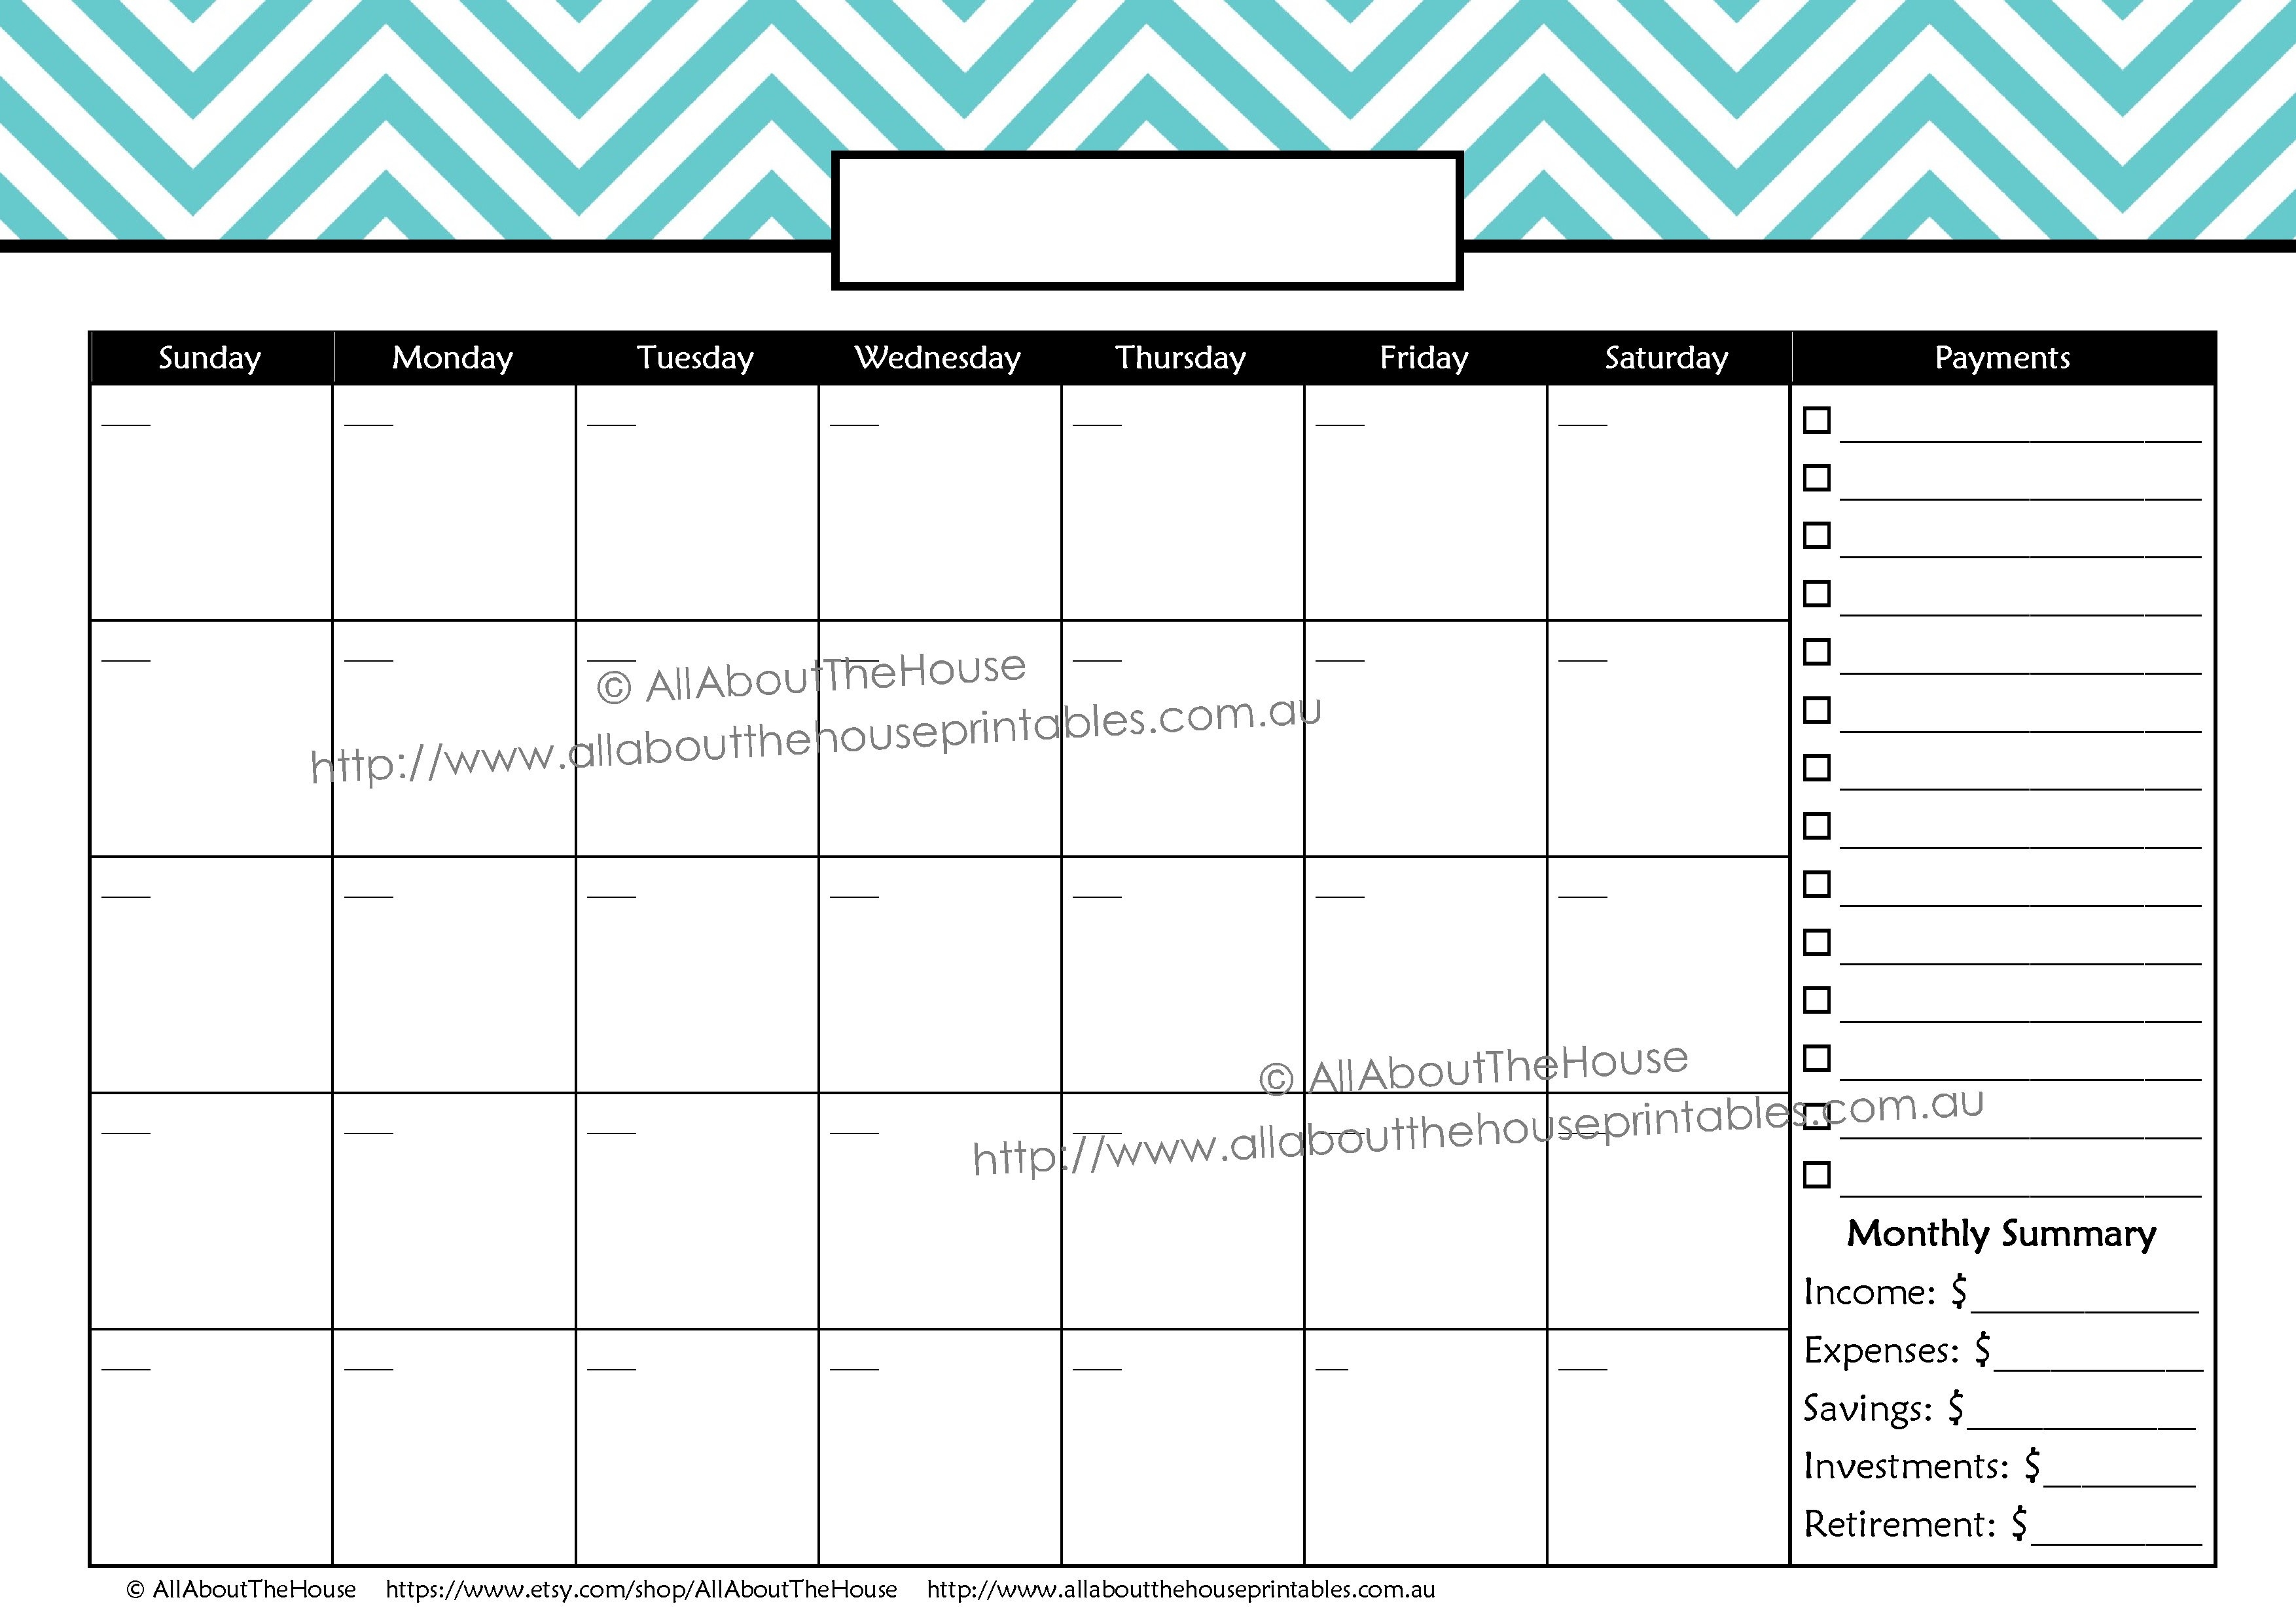 Bpay Planner | Allaboutthehouse Printables-Monthly Bill Payment Calendar Template